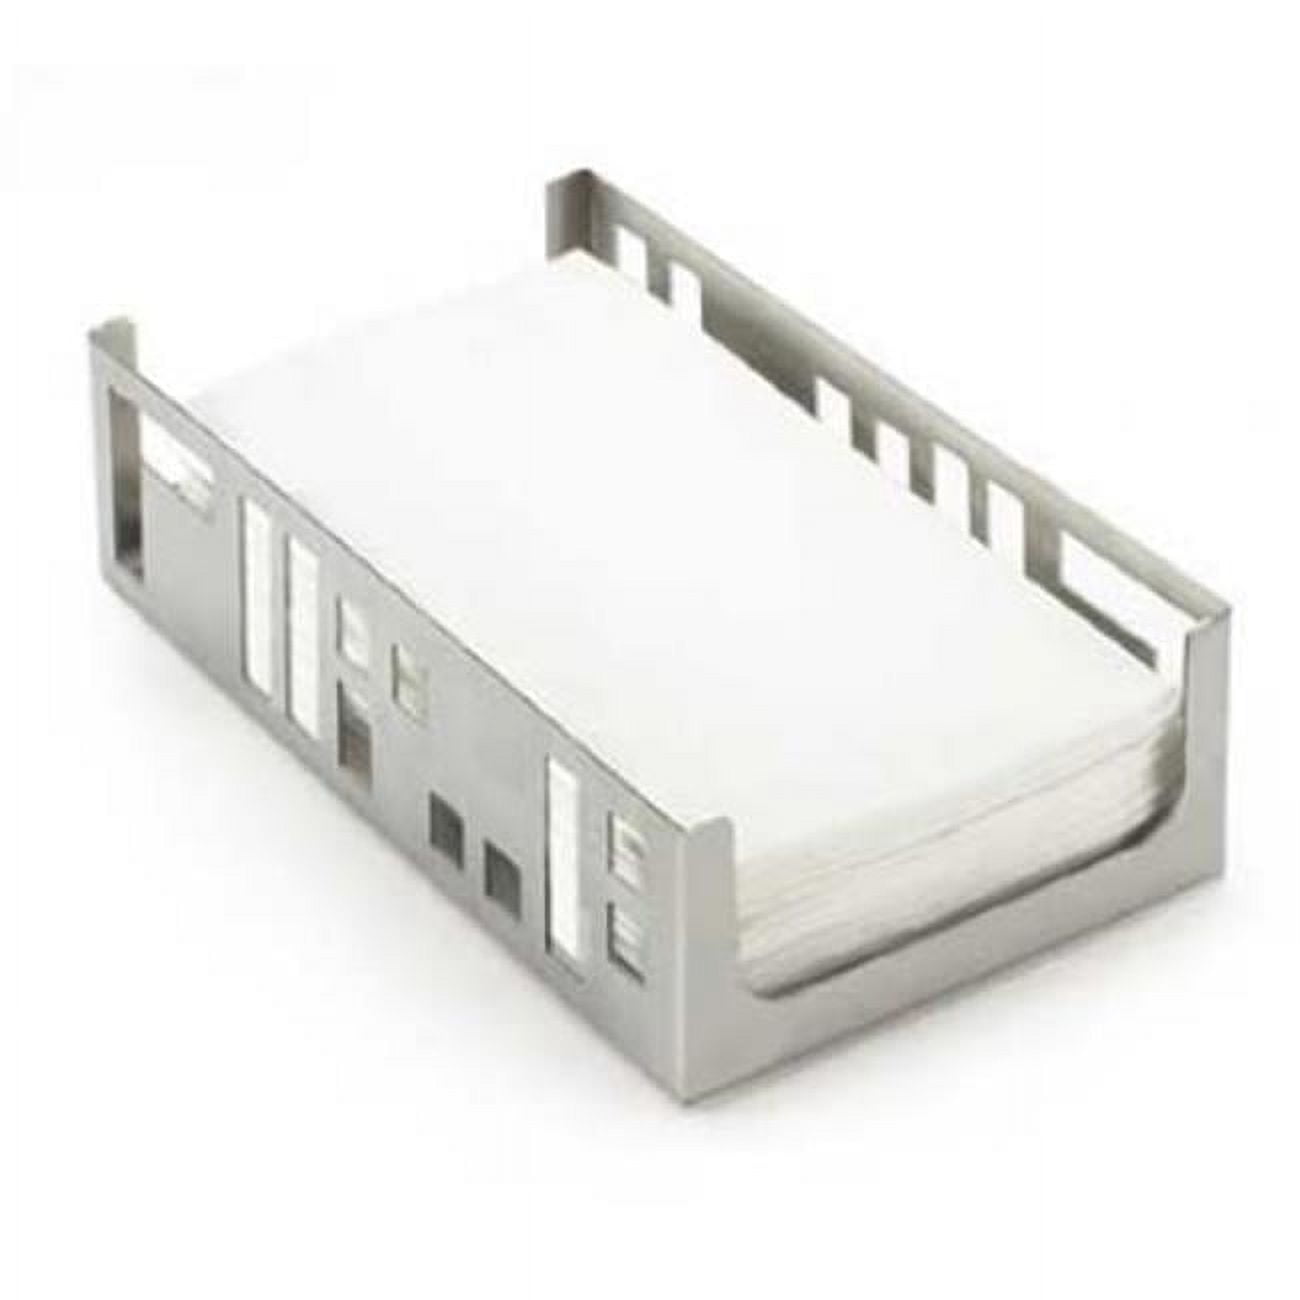 Picture of Cal Mil 1606-55 Stainless Steel Squared Napkin Holder - 9.25 x 5.125 x 2.5 in.